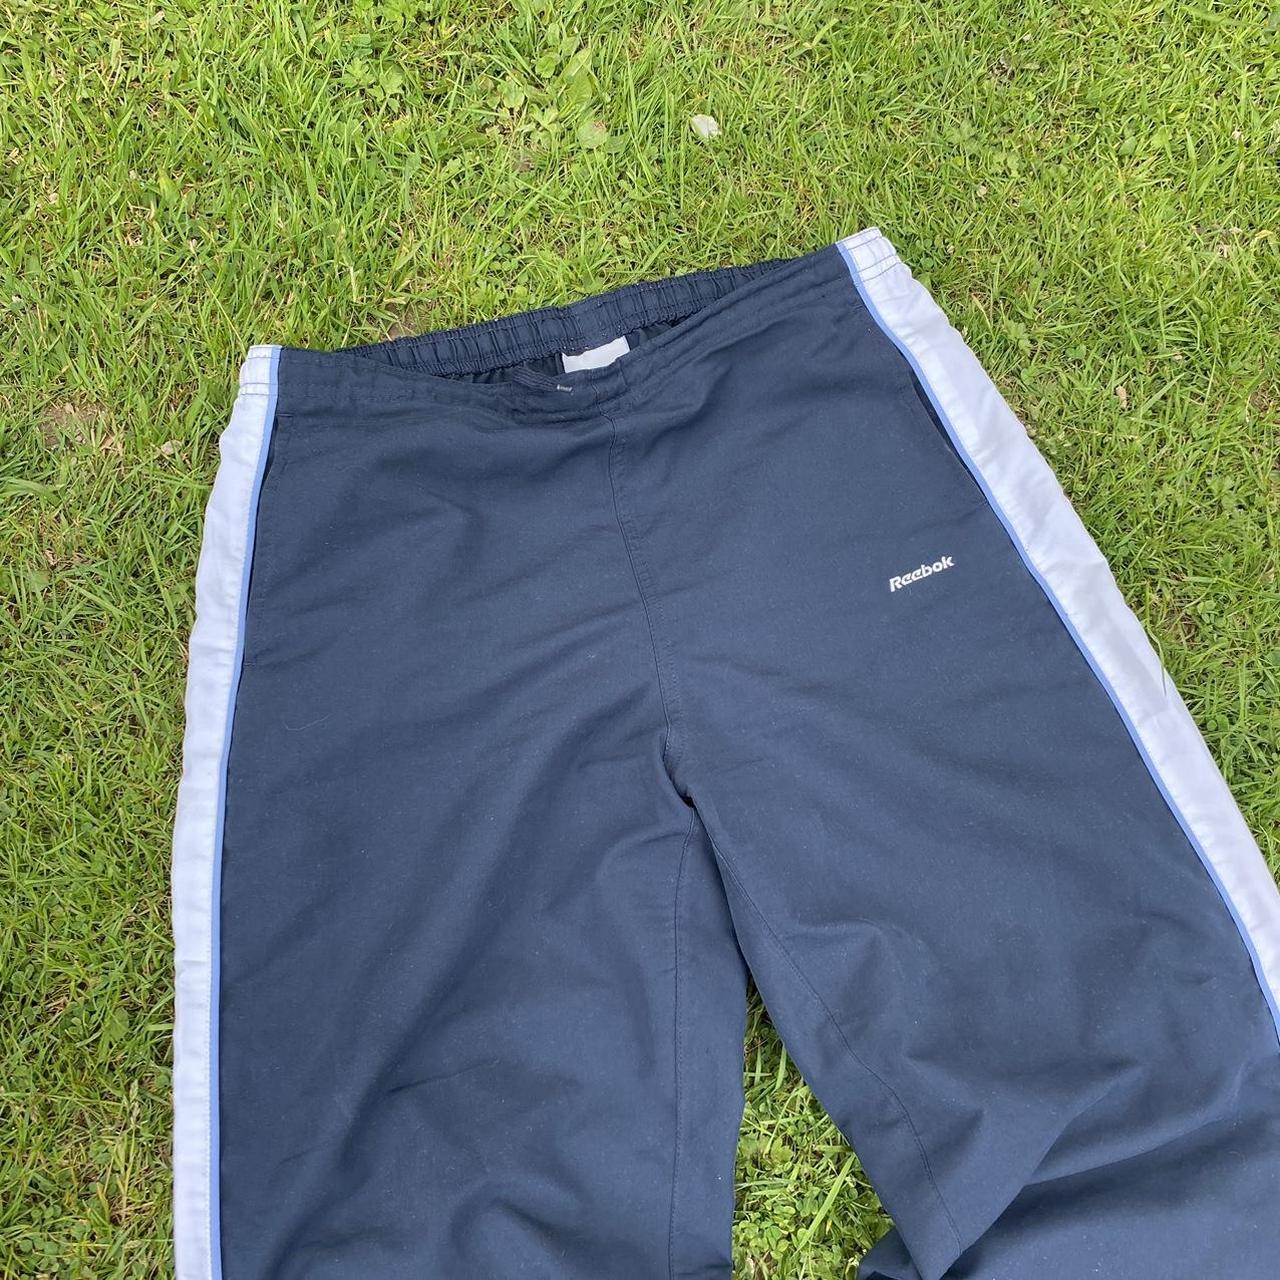 Reebok Men's Navy and White Joggers-tracksuits | Depop